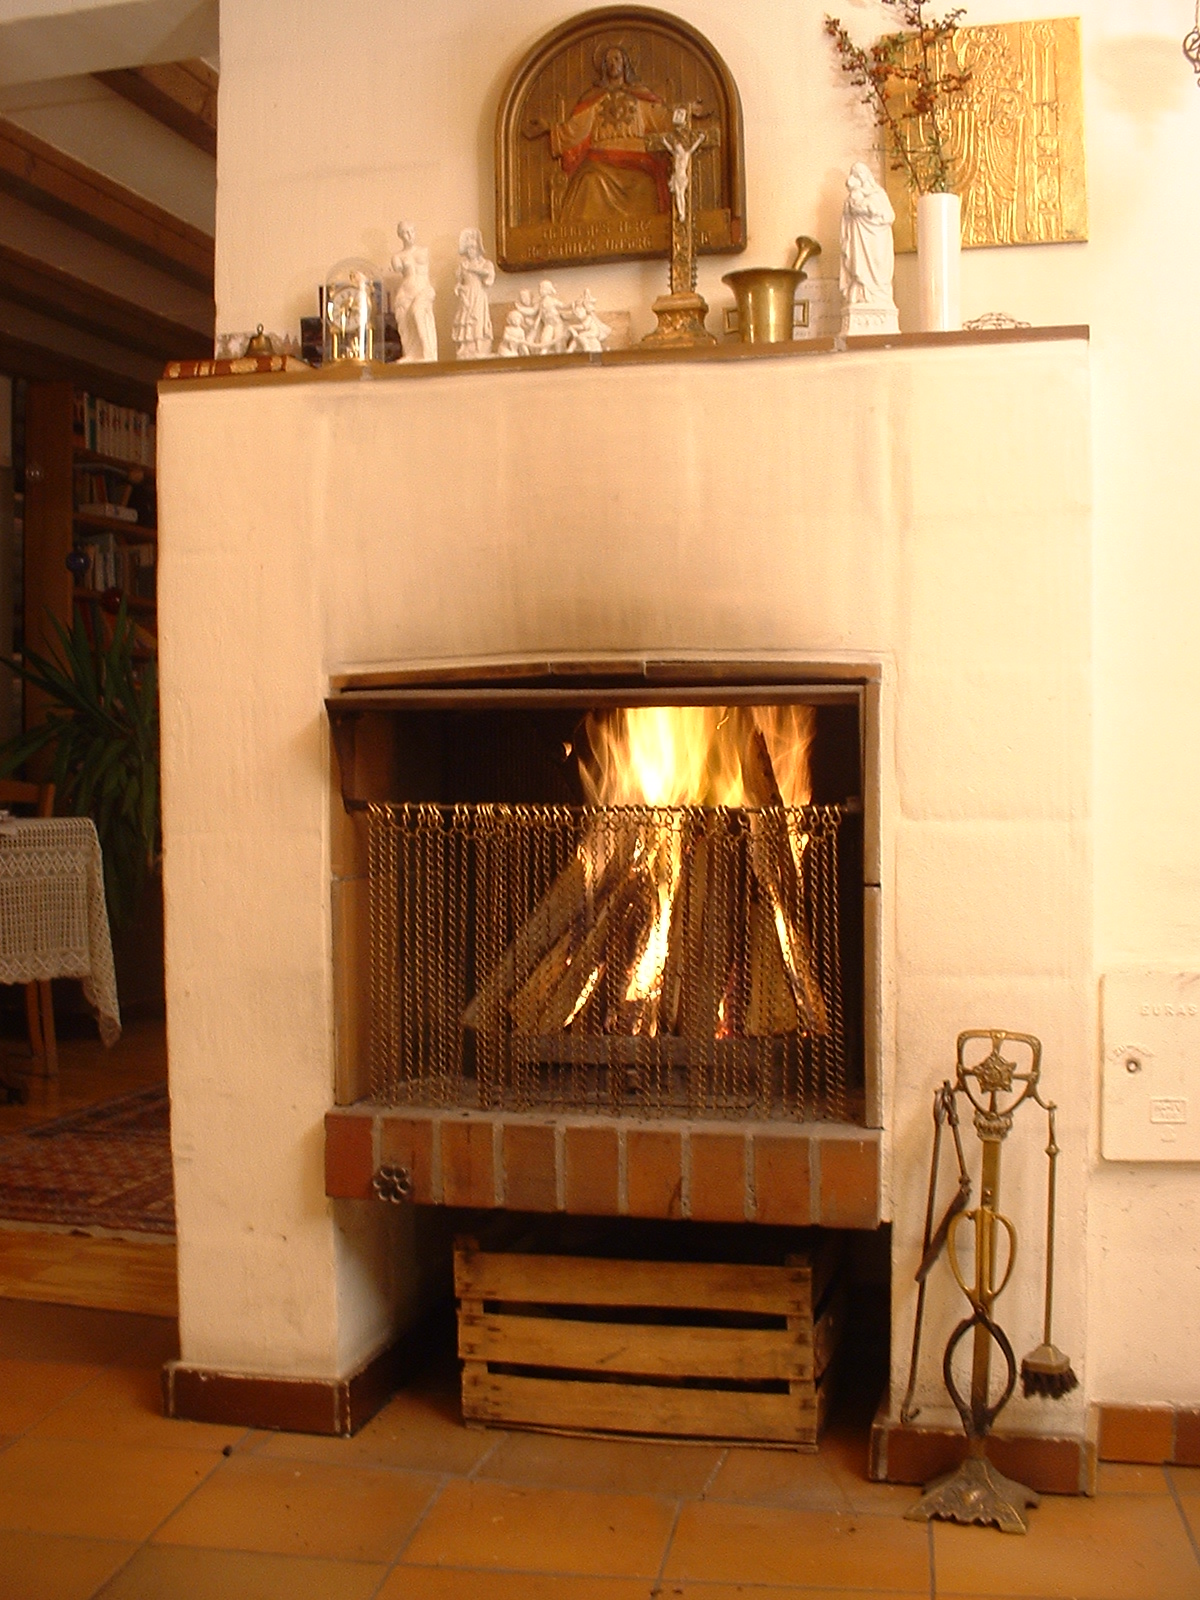 How to Install Gas Fireplace In Existing Chimney Inspirational Fireplace